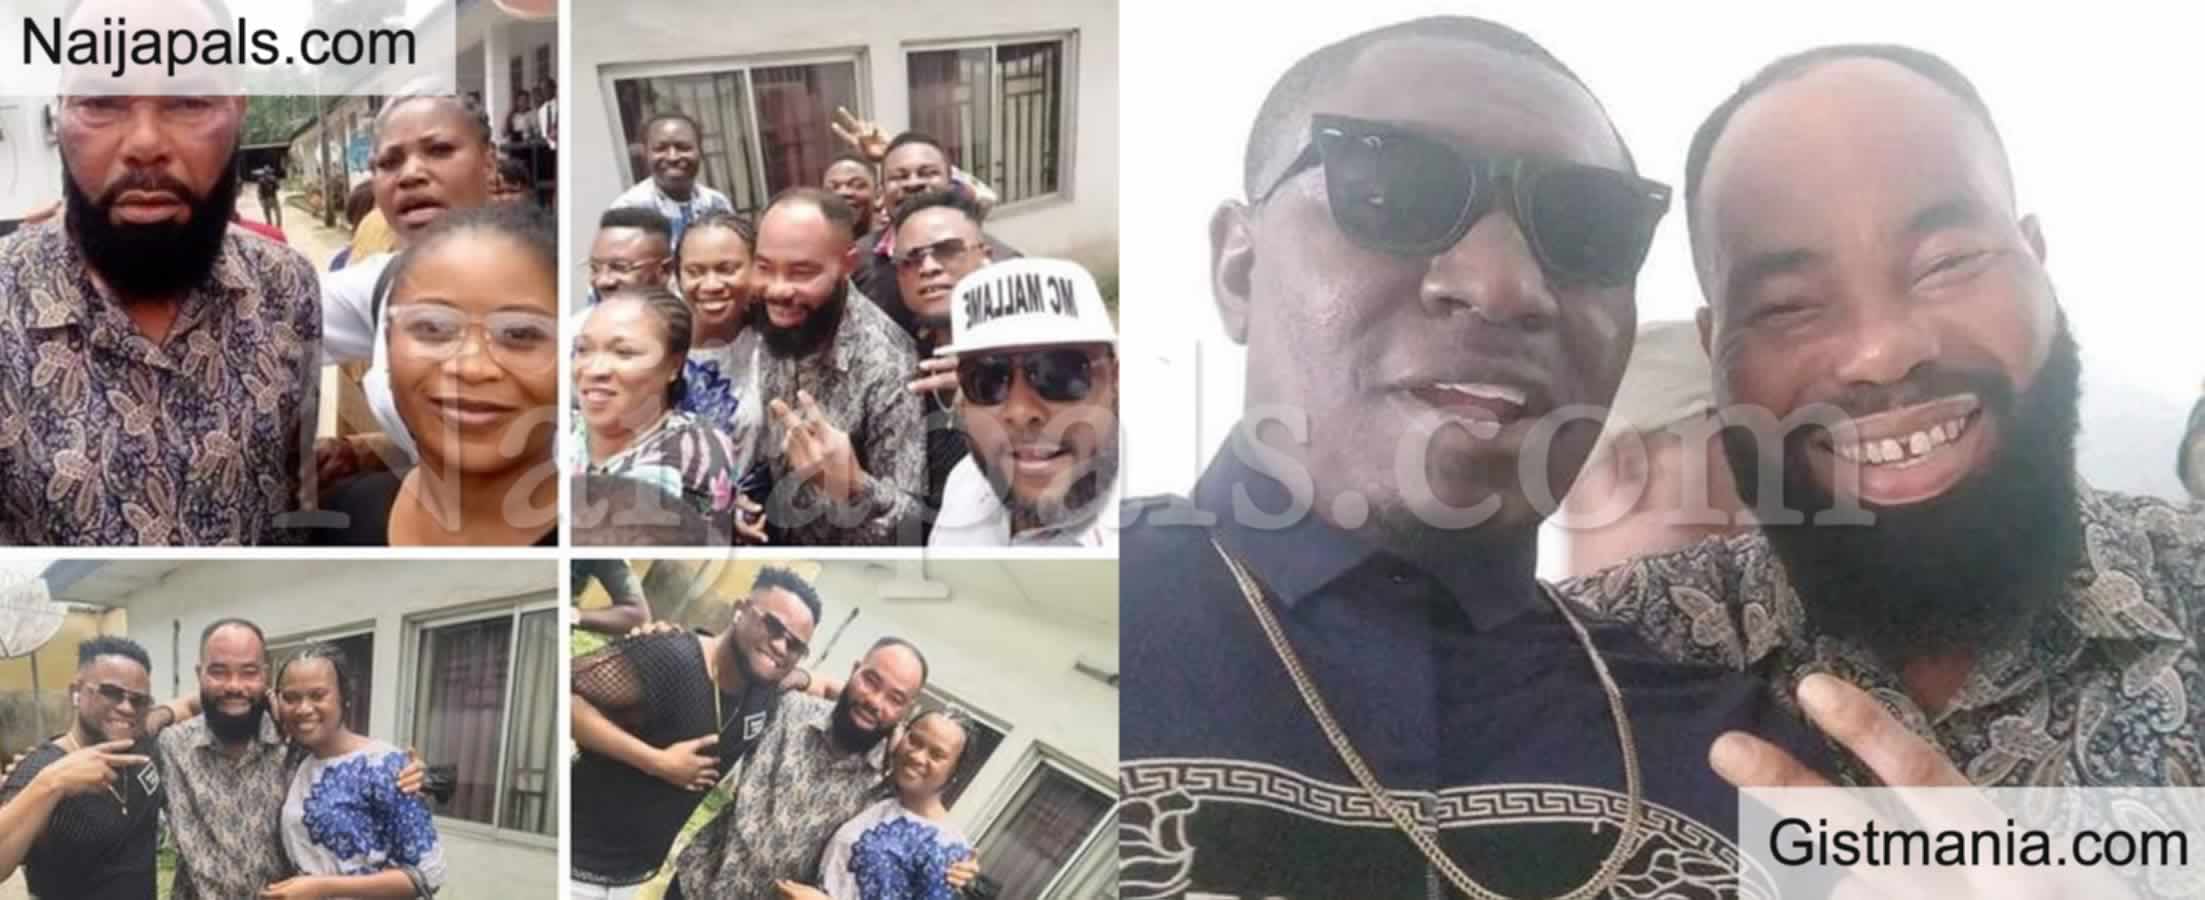 <img alt='.' class='lazyload' data-src='https://img.gistmania.com/emot/photo.png' /> PICS: <b>Friend Of Actor, Moses Celebrating His Release After Being Detained For Molesting Minor</b>